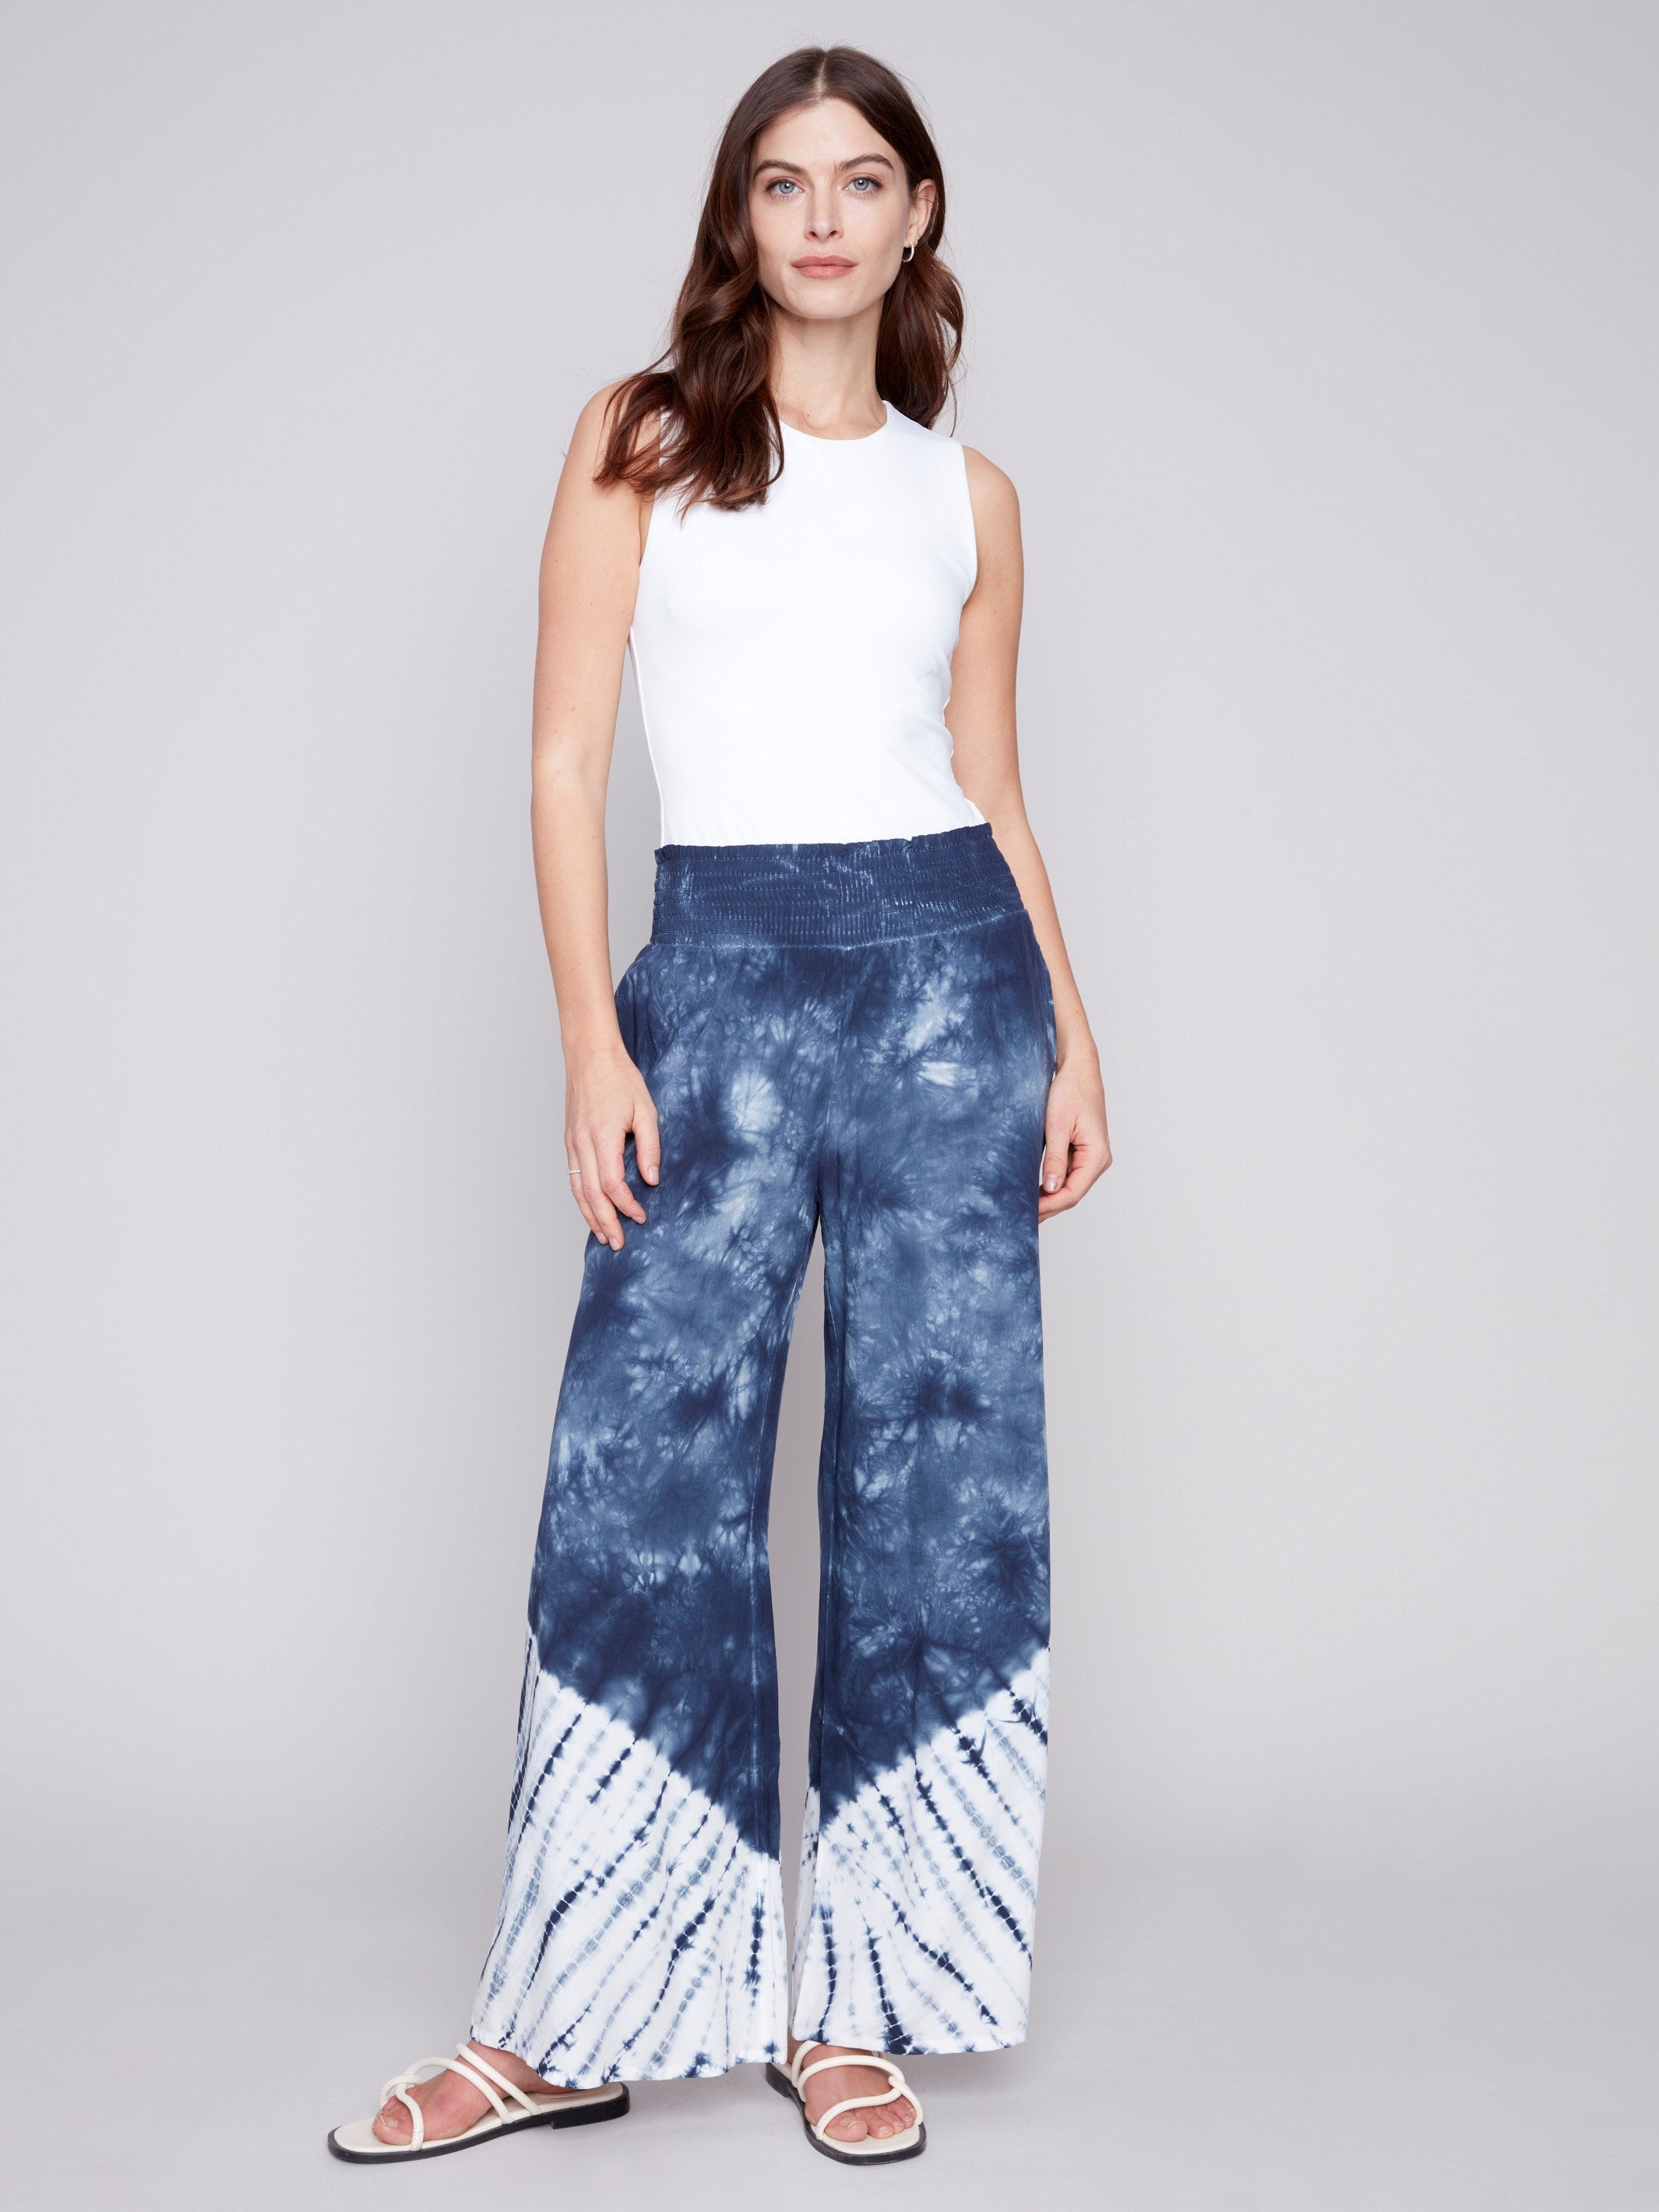 Printed Flowy Palazzo Pants - Navy - Charlie B Collection Canada - Image 4